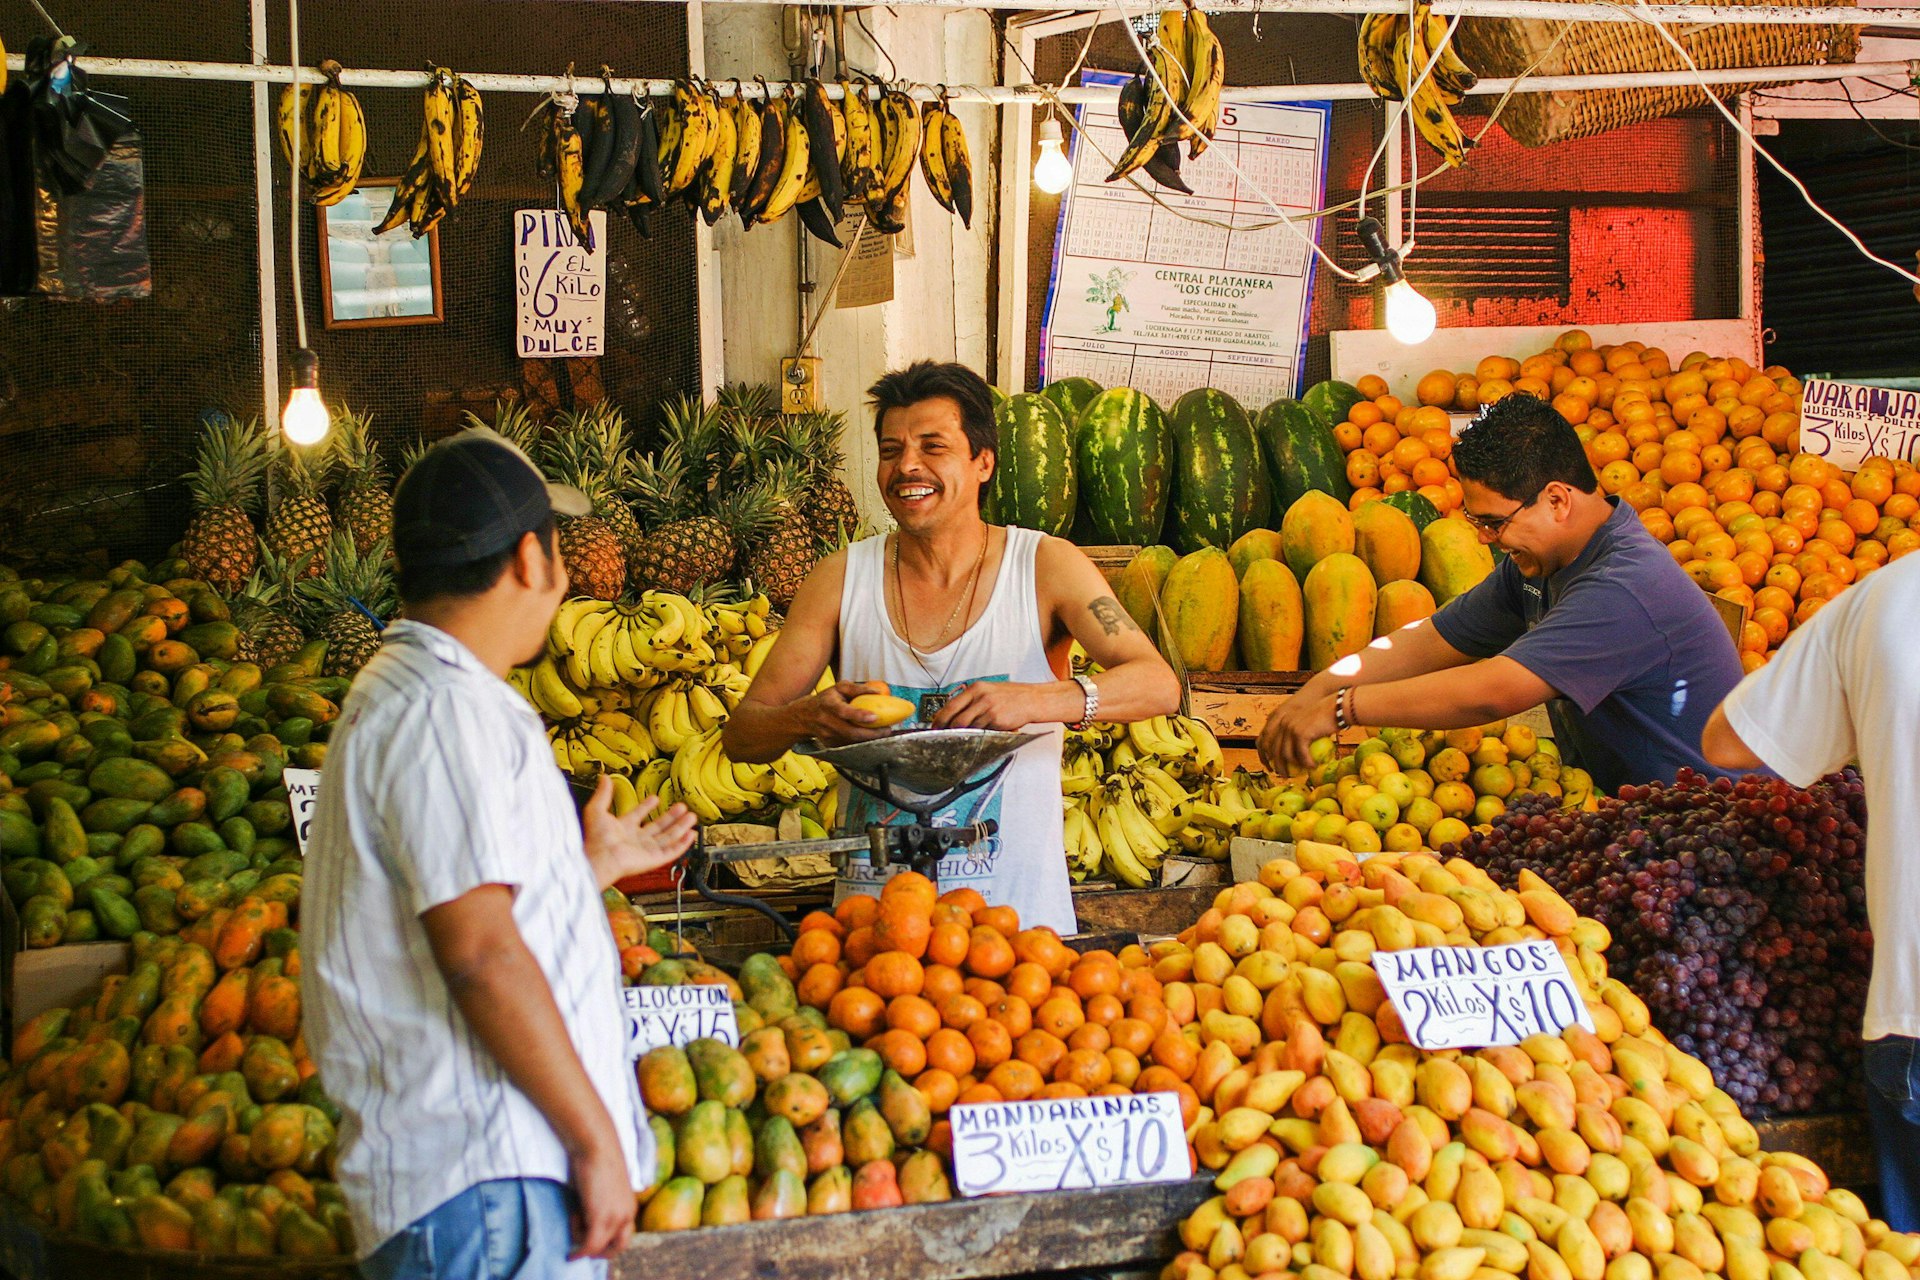 Two men share a joke as they work at a market fruit stall selling mangos, bananas and pineapples.